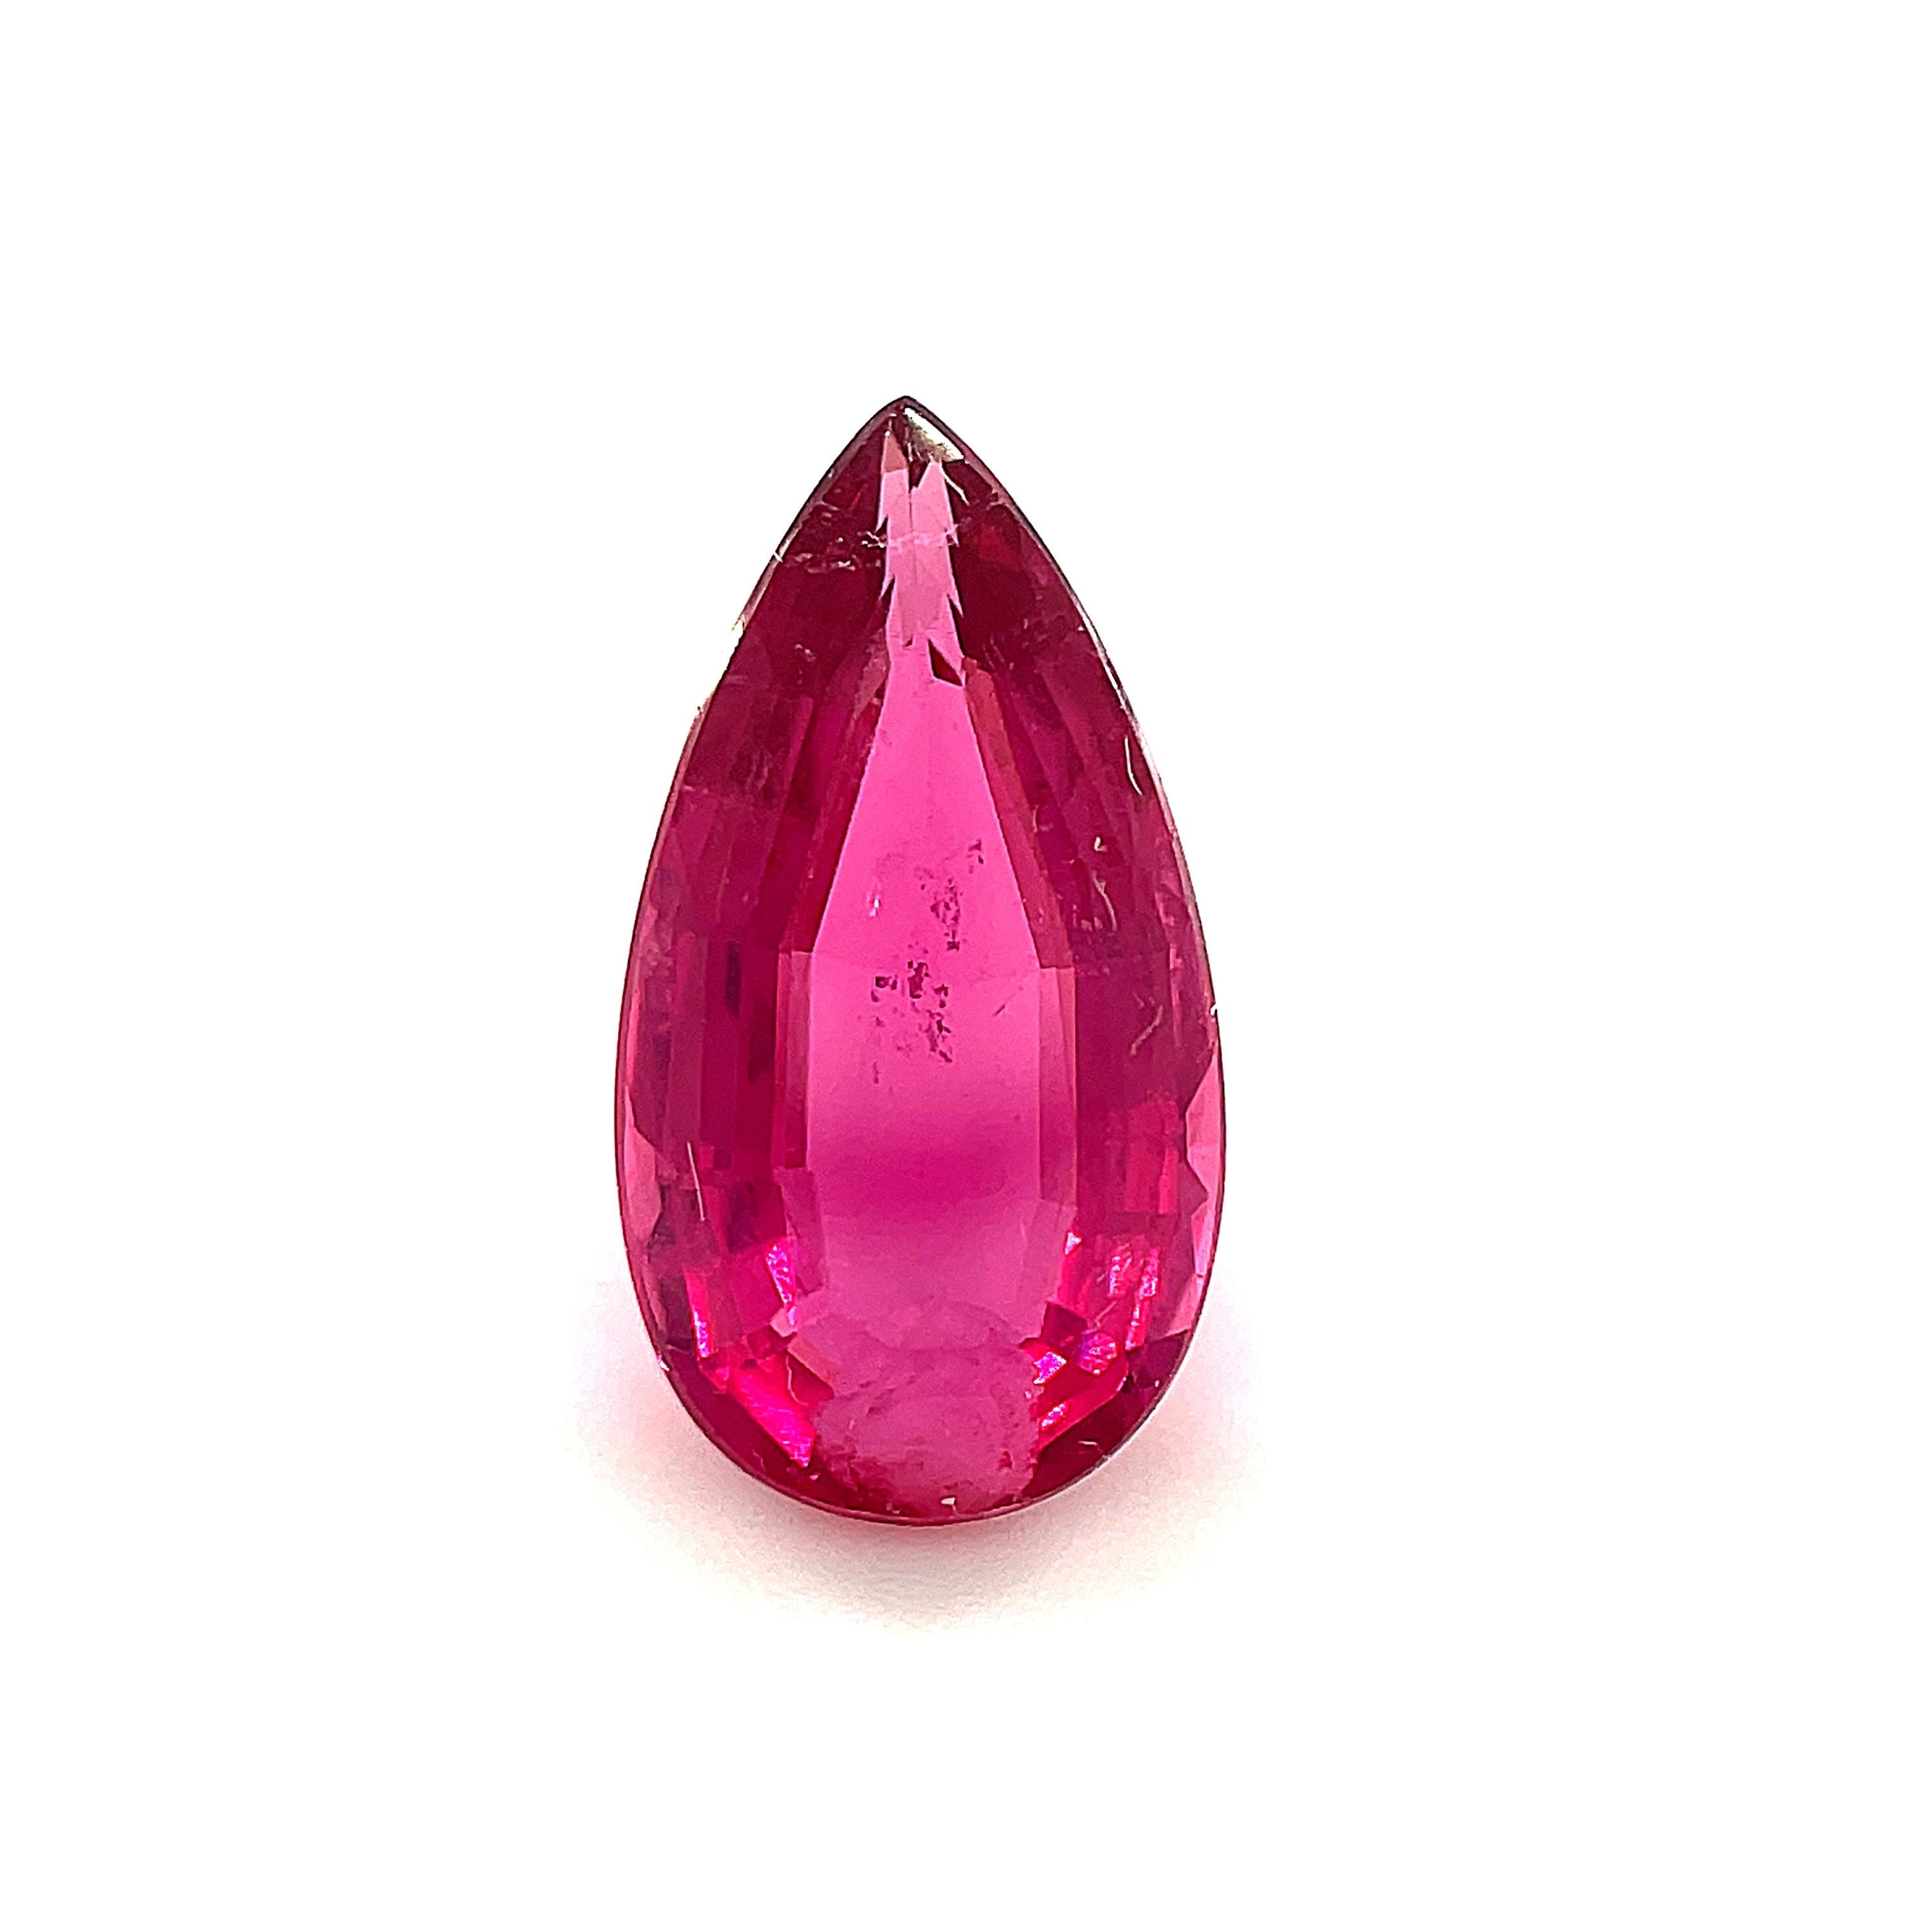 2.70 Carat Elongated Pear Shape Rubellite Tourmaline, Unset Loose Gemstone In New Condition For Sale In Los Angeles, CA